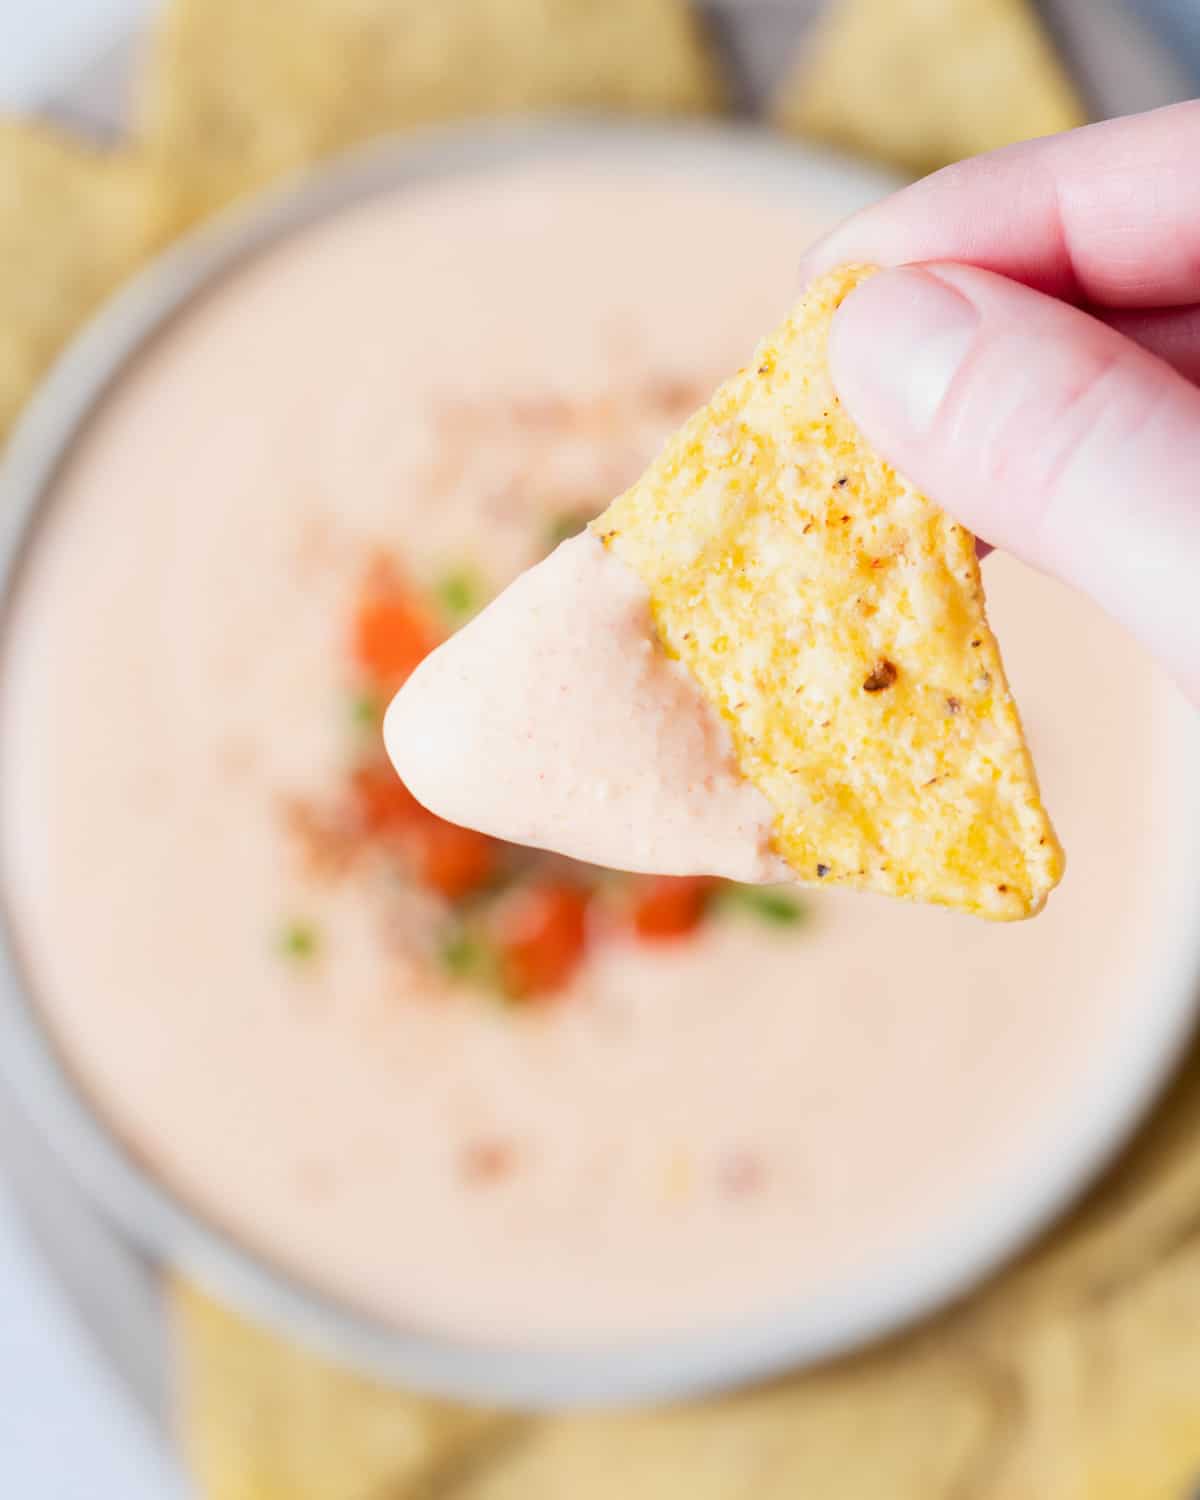 Hand holding chip with cottage cheese queso on it.